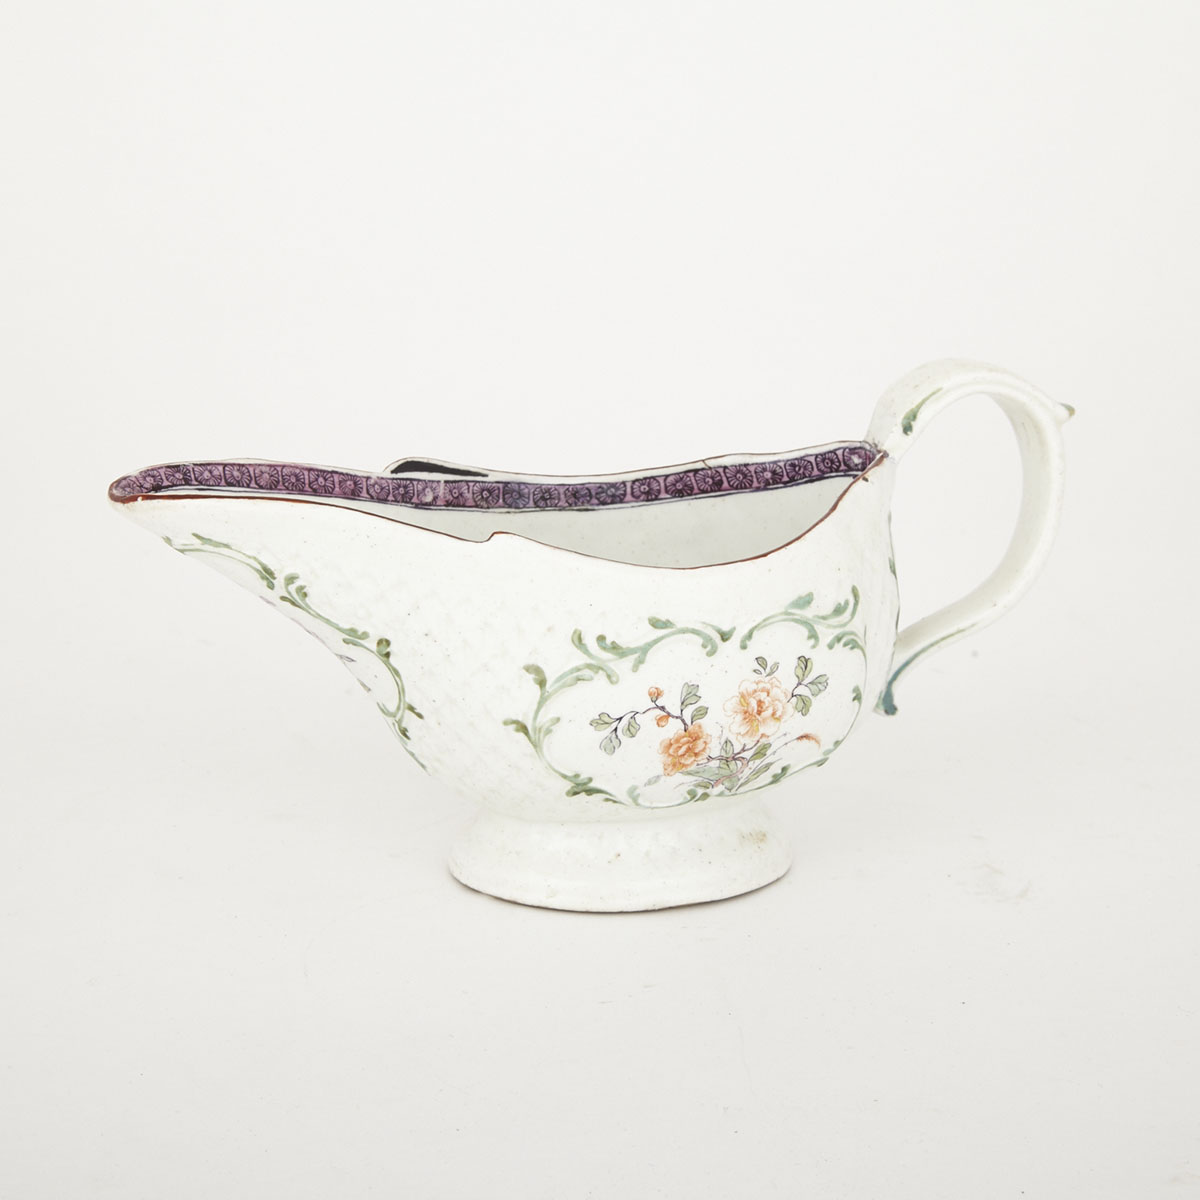 English Porcelain Moulded and Floral Painted Sauce Boat, c.1770